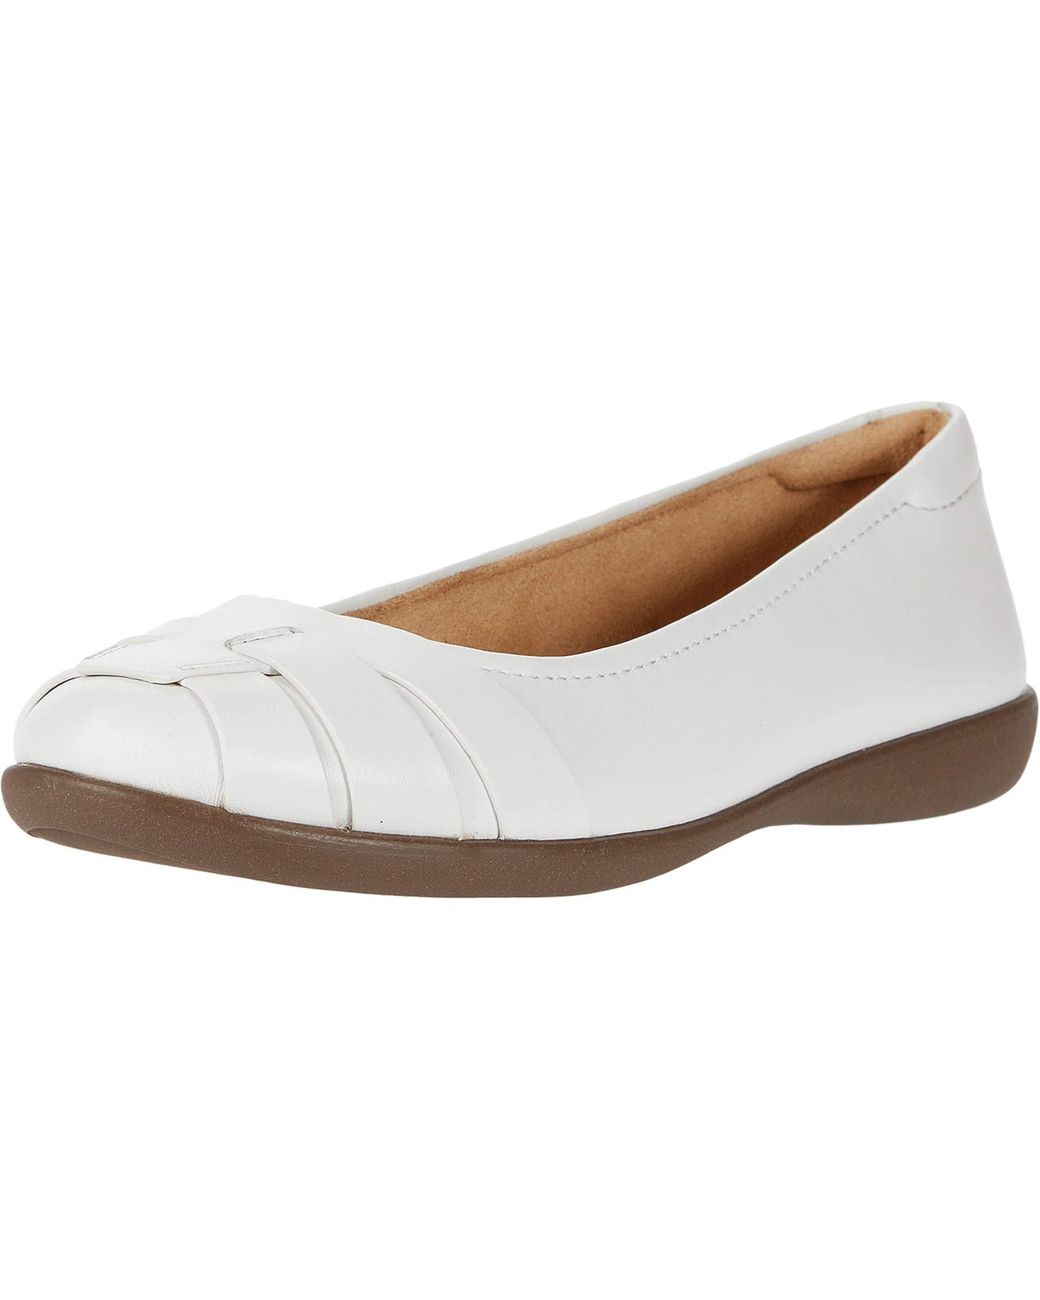 Naturalizer Leather Womens Freeport Ballet Flat in White Leather (White ...